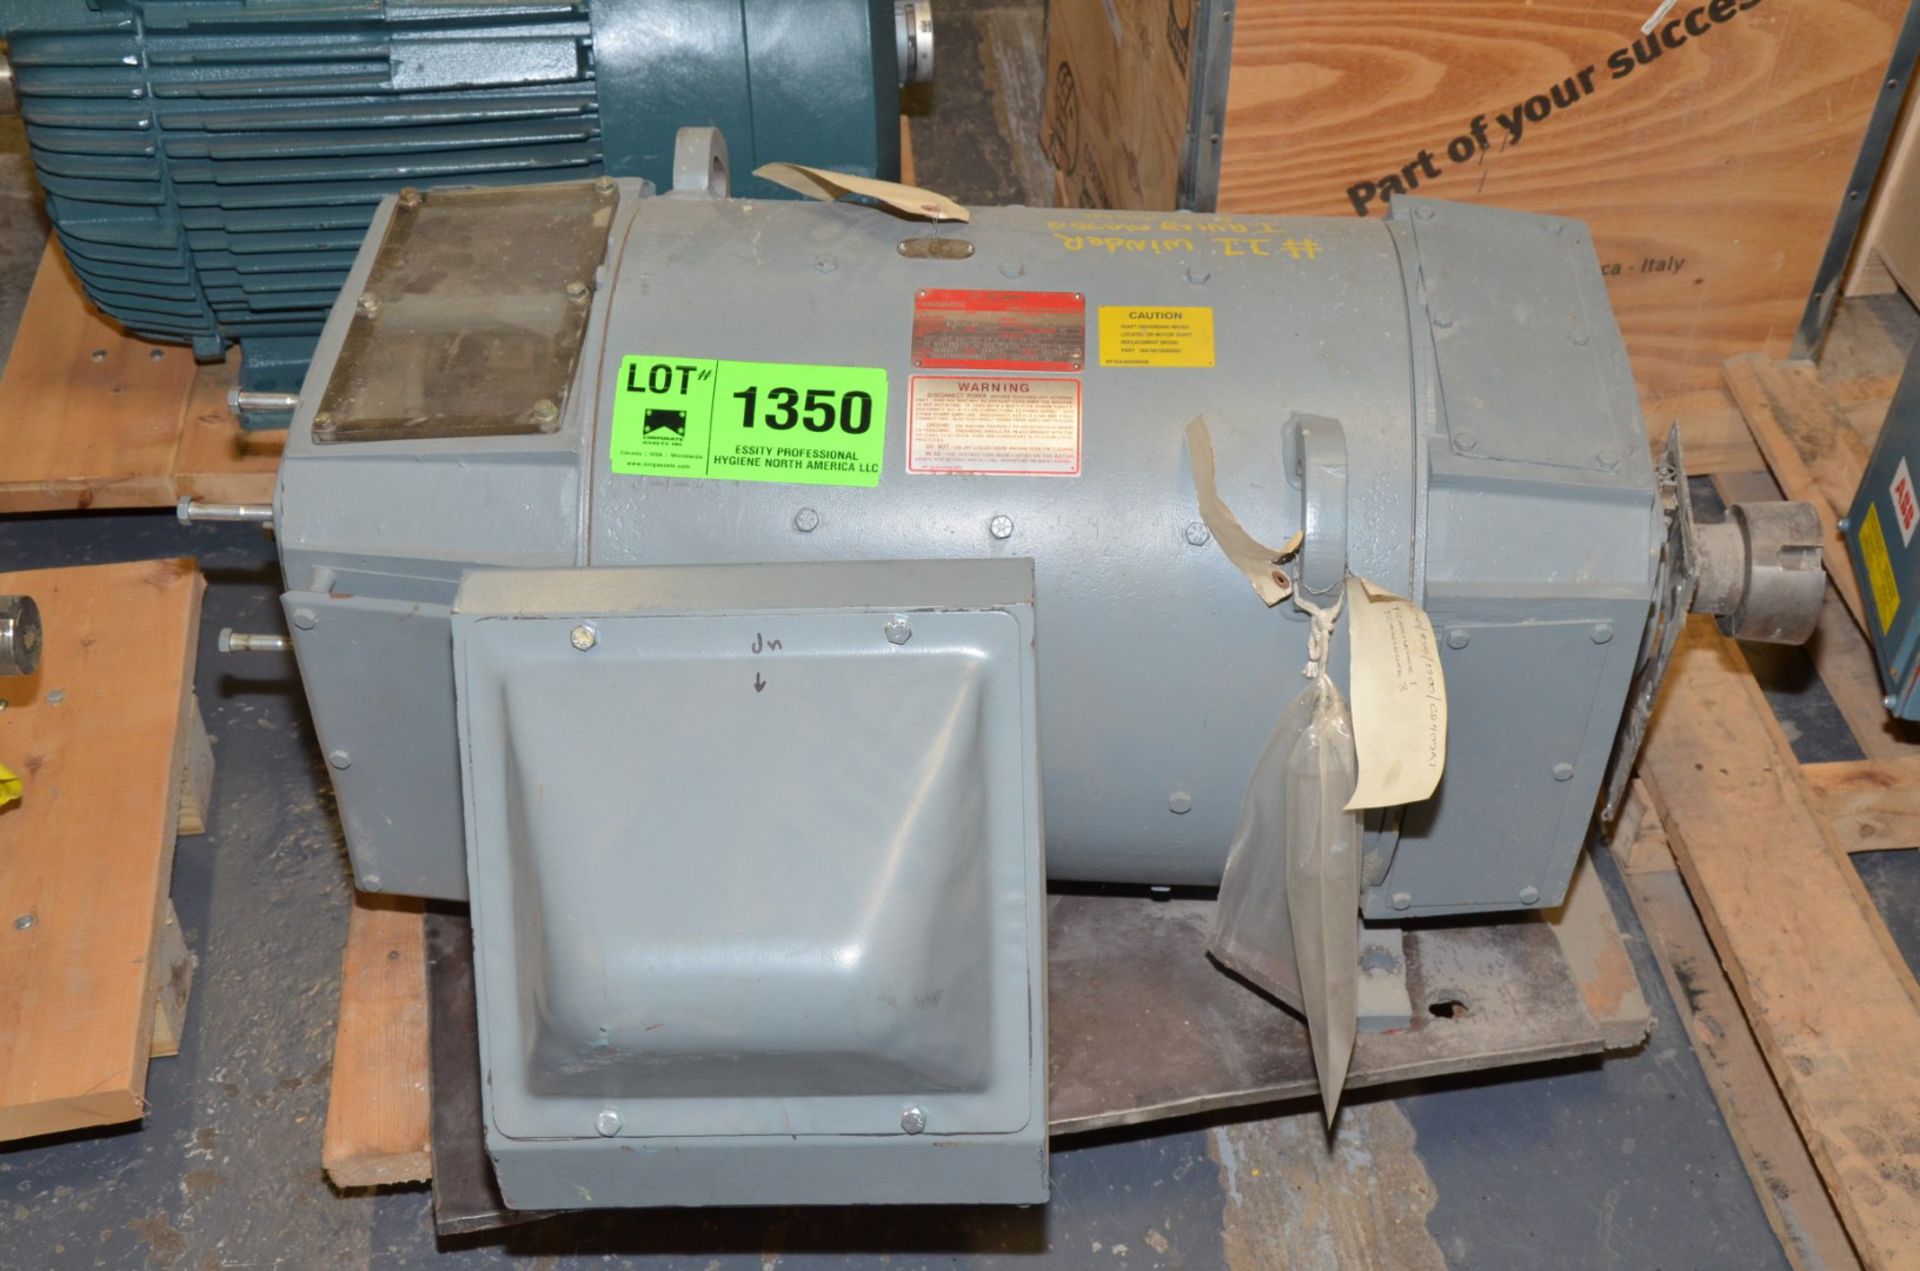 GE 100 HP 1700 RPM 460V ELECTRIC MOTOR [RIGGING FEE FOR LOT #1350 - $25 USD PLUS APPLICABLE TAXES]